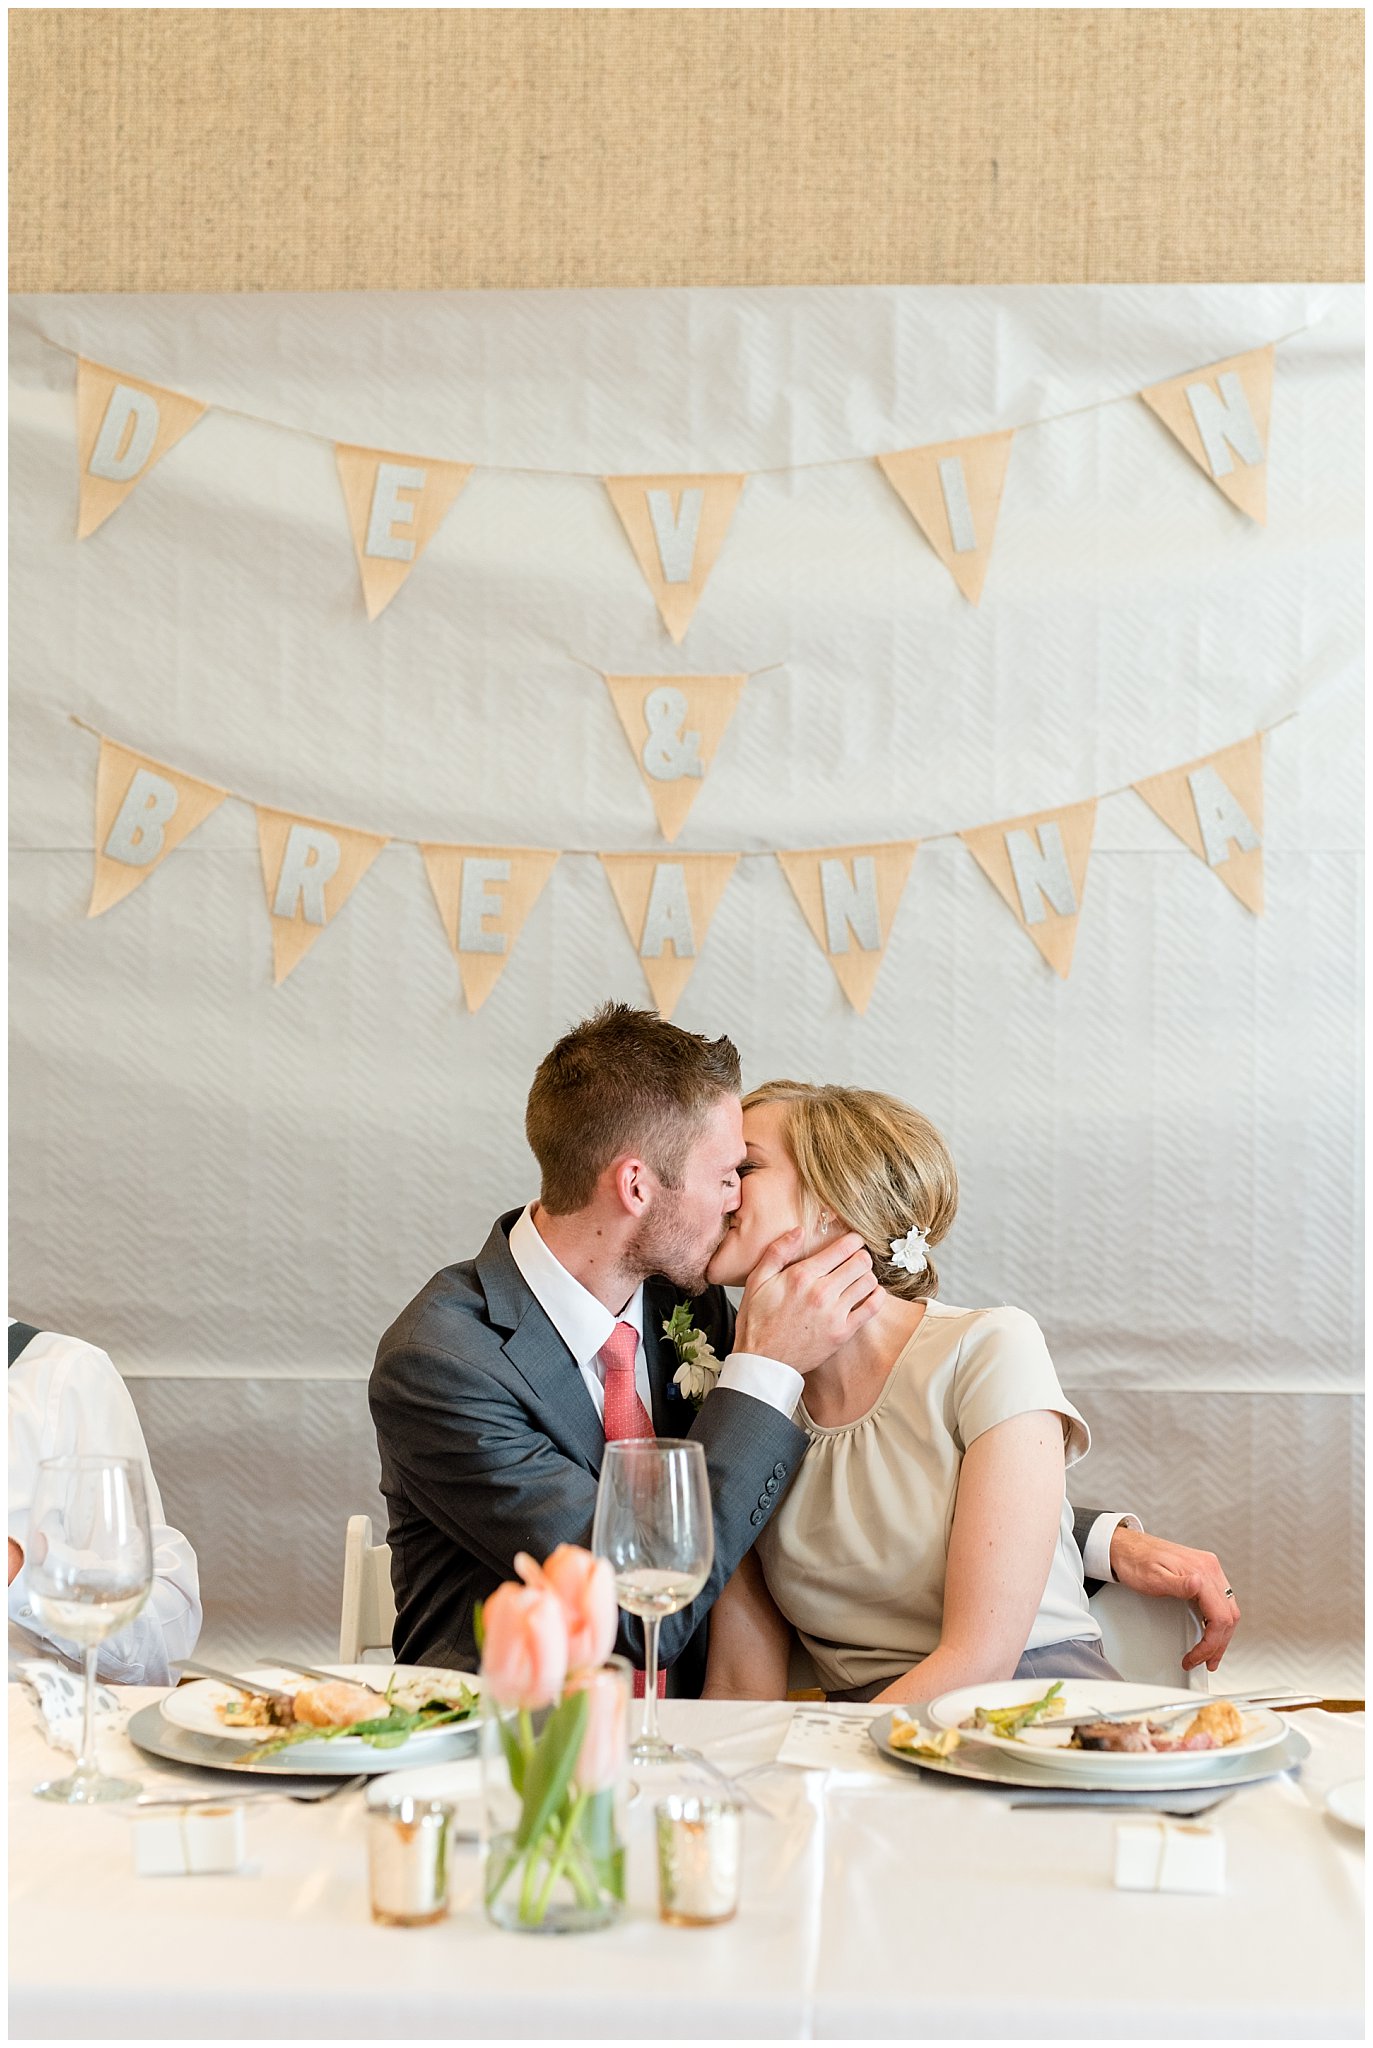 Salt Lake City Wedding | Bride and groom kiss at luncheon | Jessie and Dallin Photography